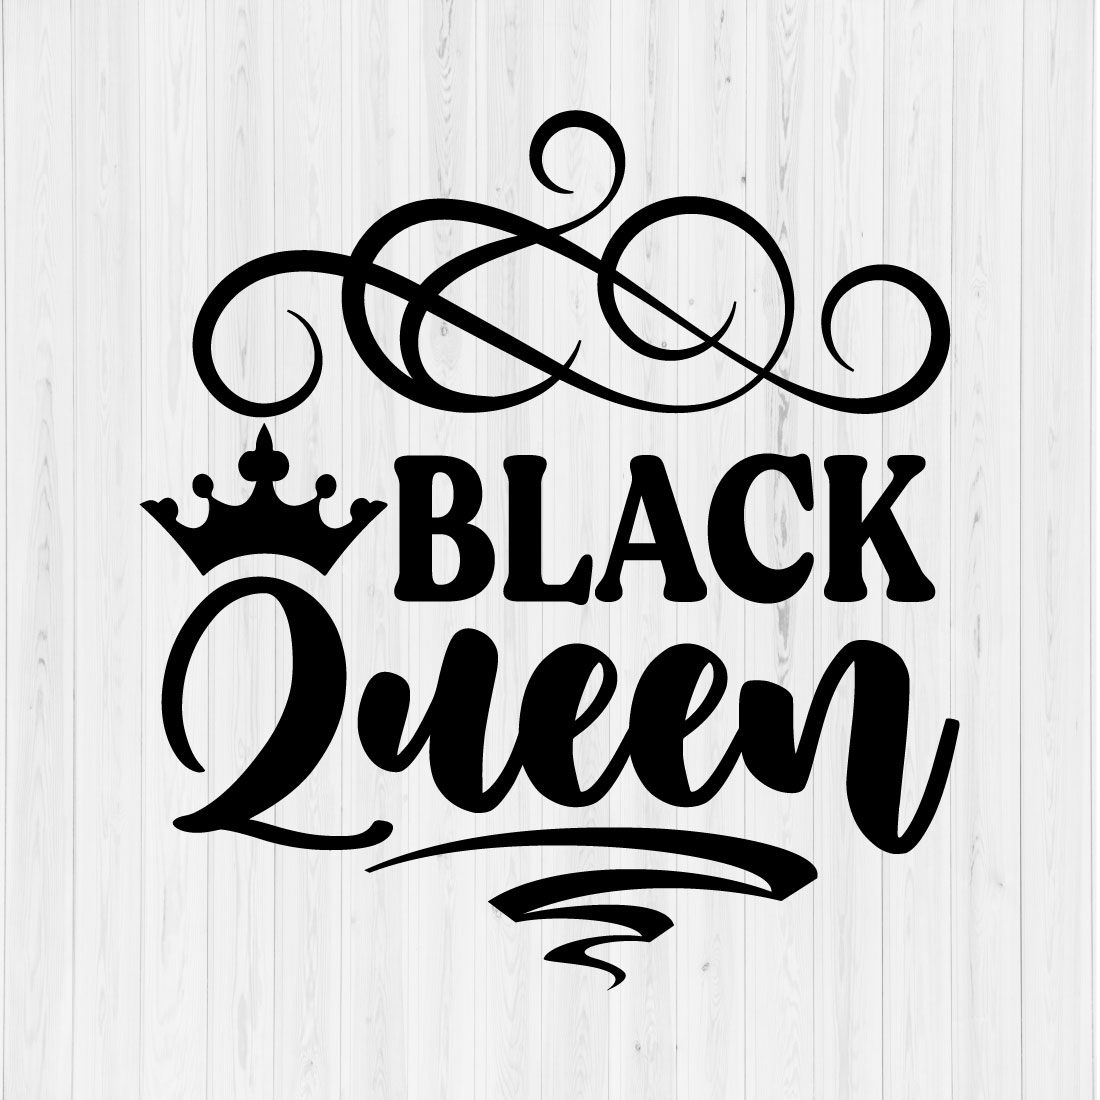 Black Queen preview image.